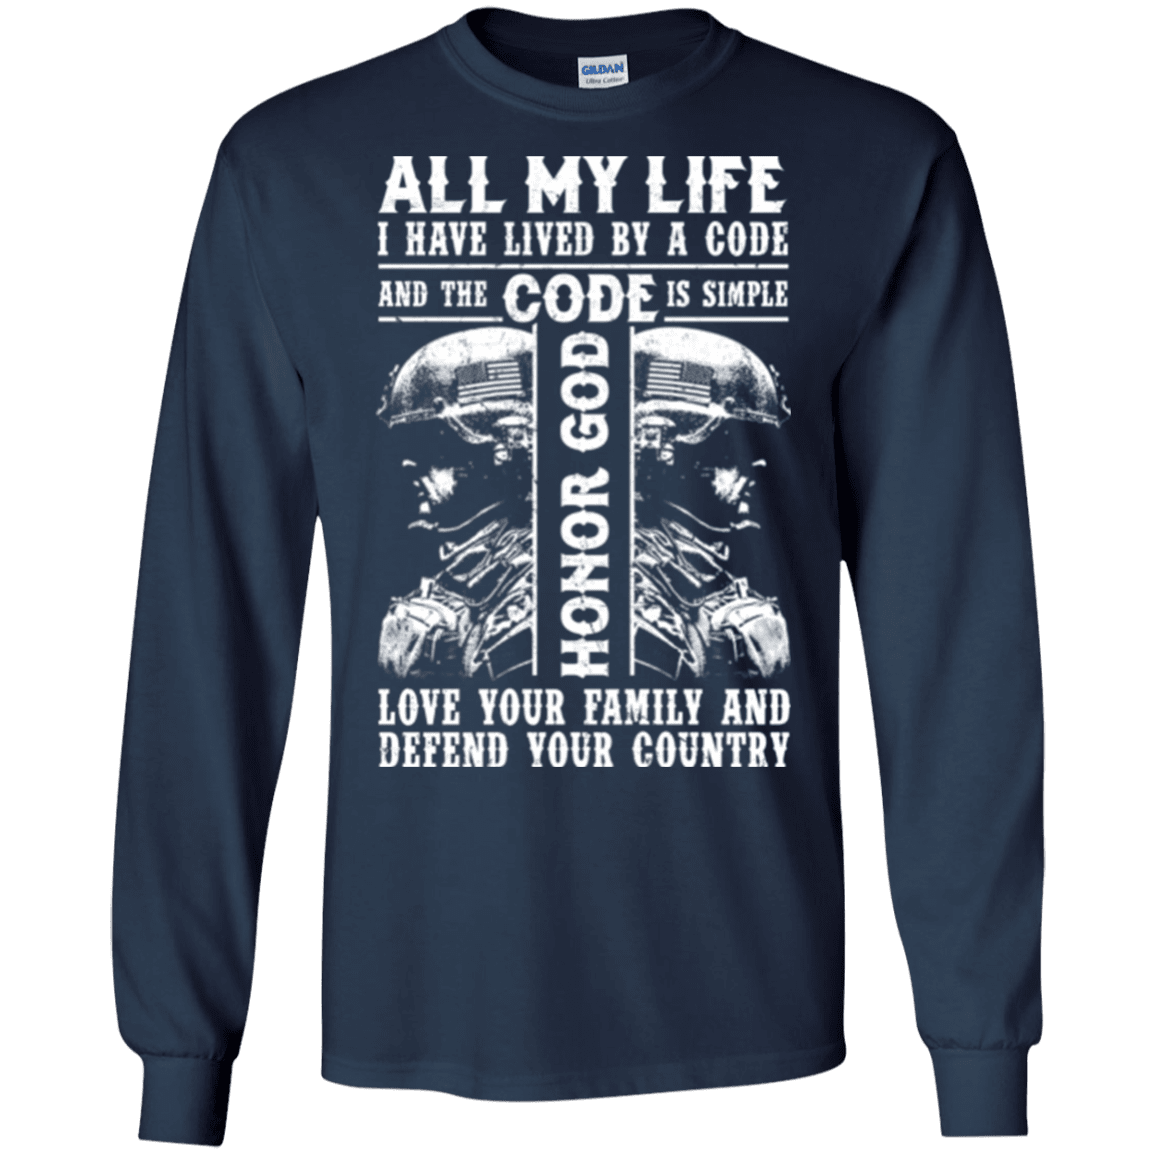 Military T-Shirt "HONOR GOD LOVE FAMILY AND DEFEND YOUR COUNTRY VETERAN"-TShirt-General-Veterans Nation